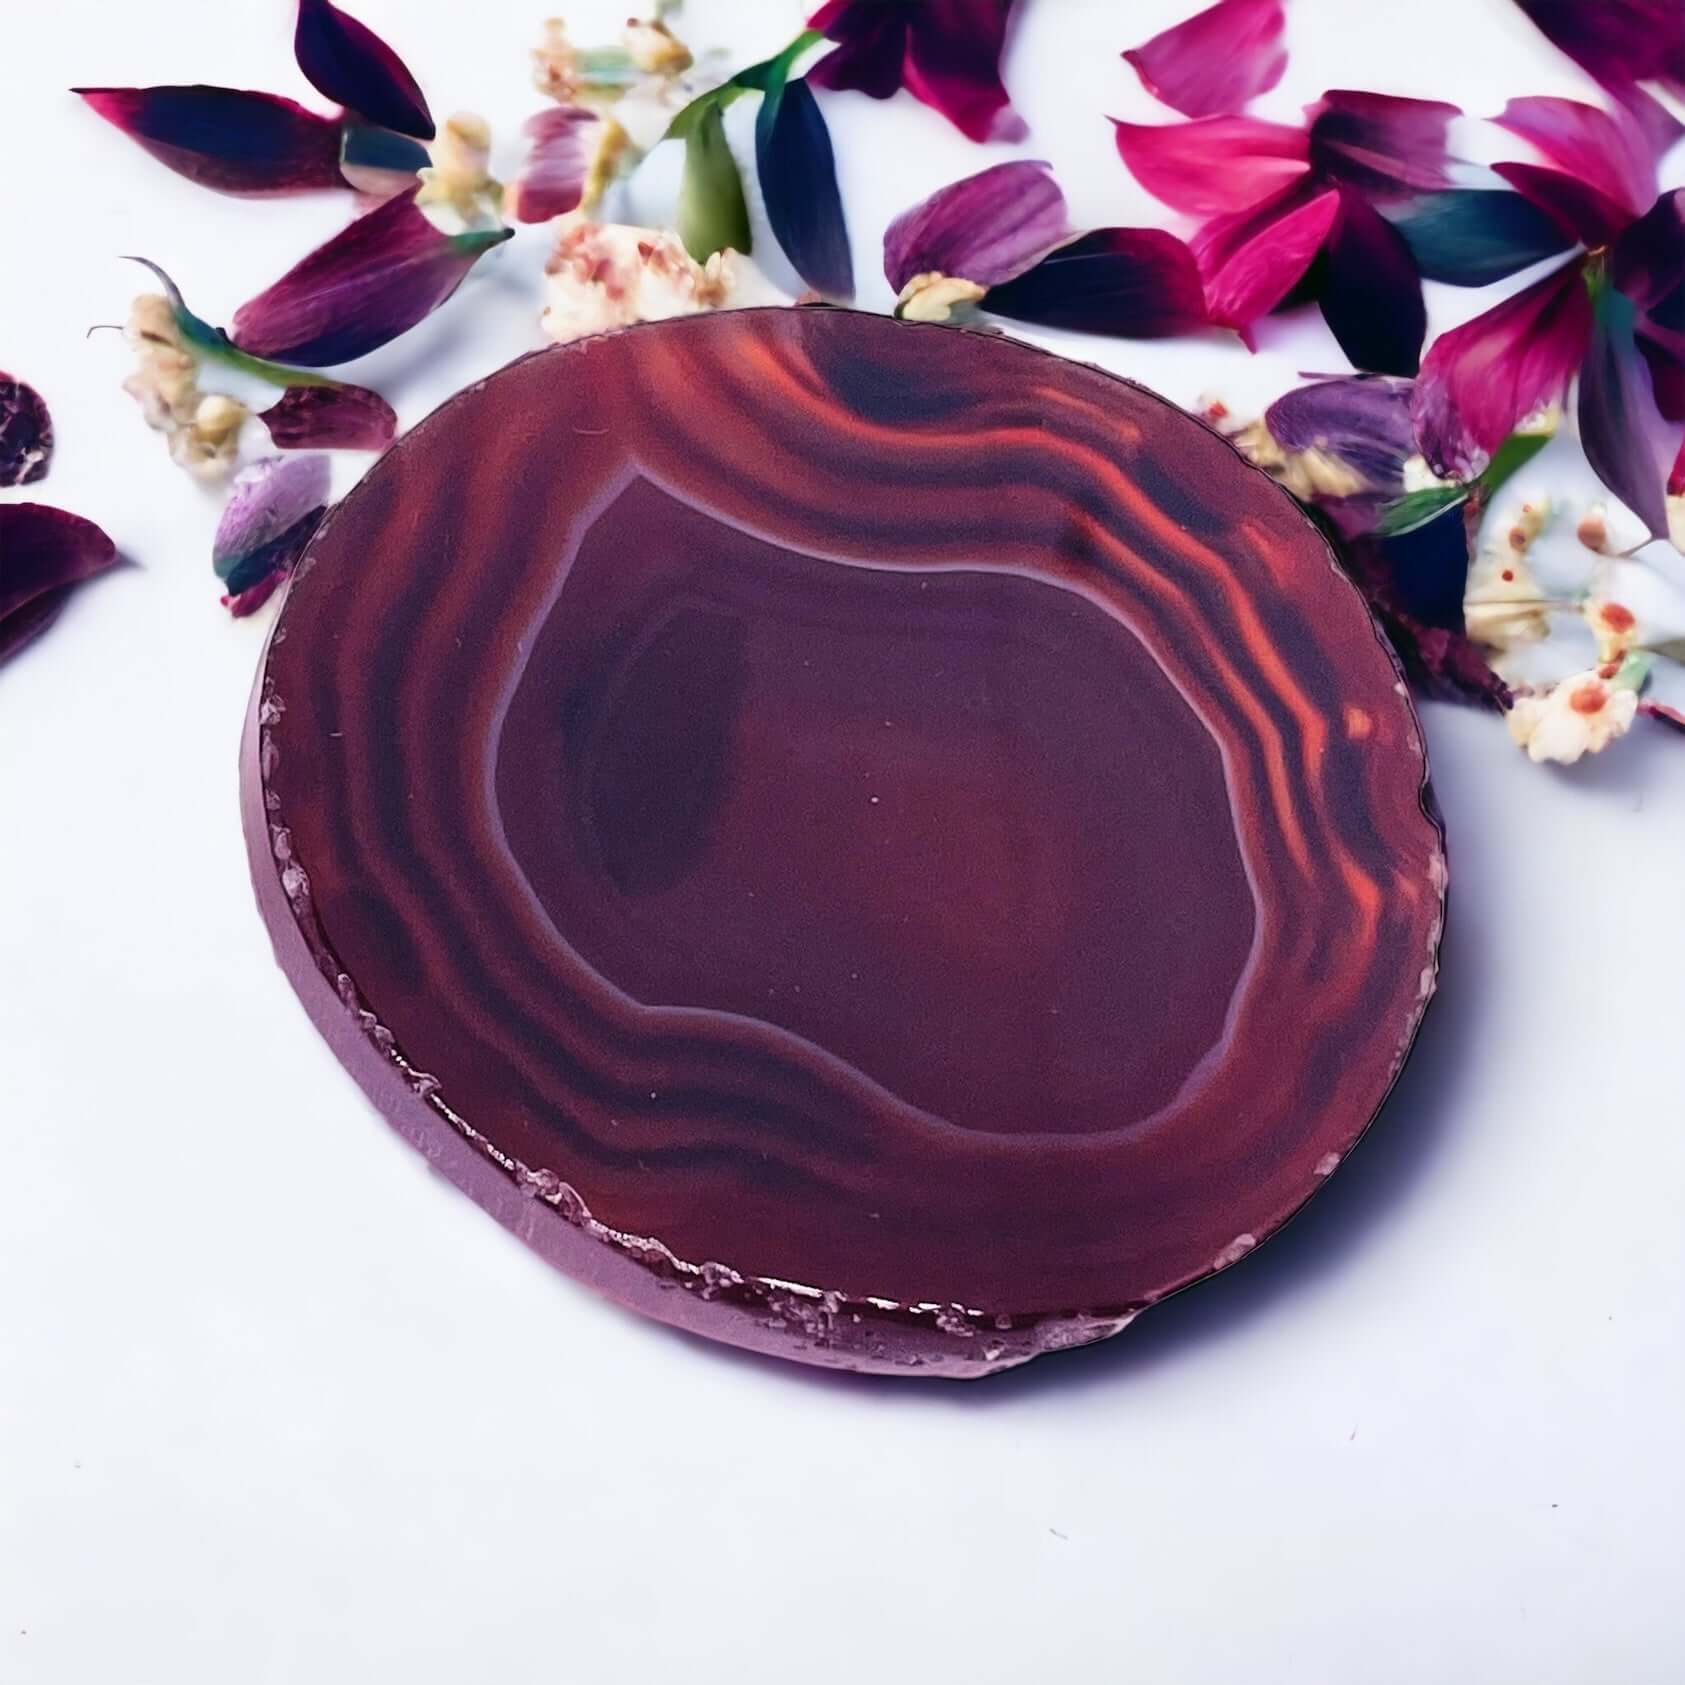 Brown agate pop socket phone holder with petals on white background